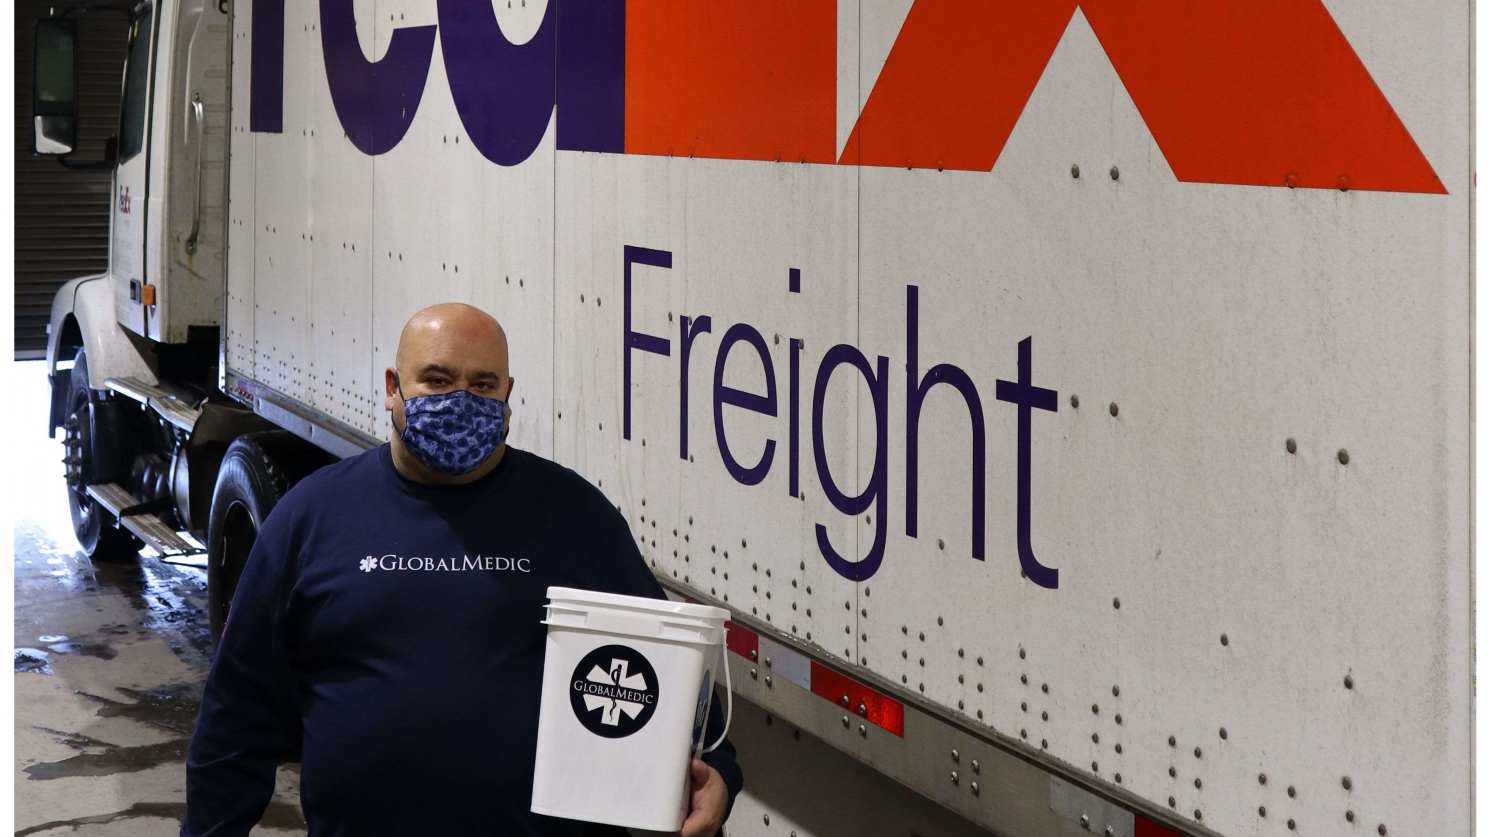 Freight truck with volunteer in front